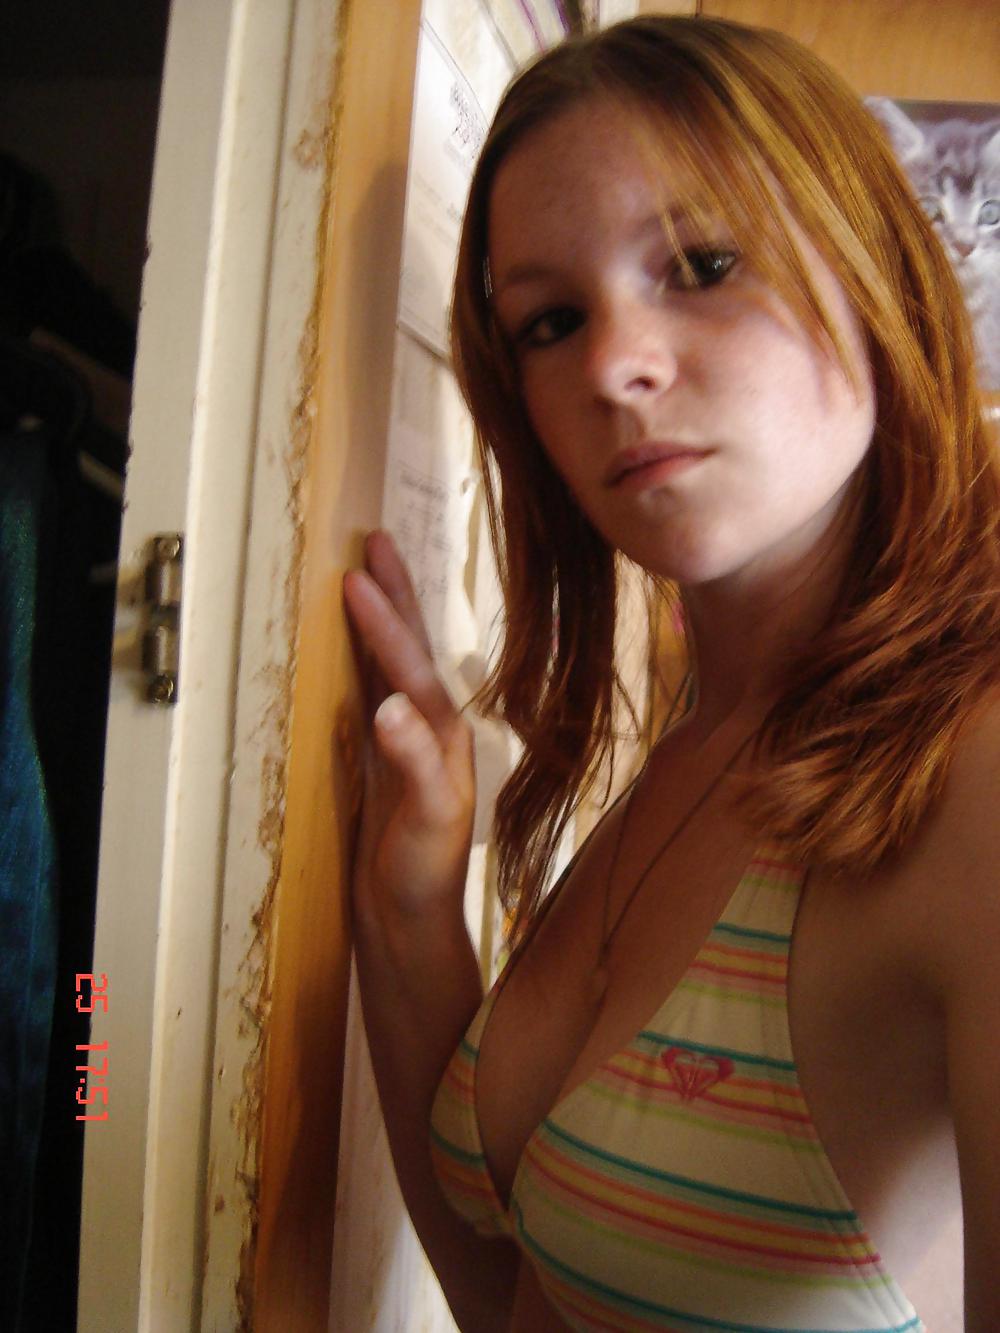 The Beauty of Amateur Redhead College Teen pict gal